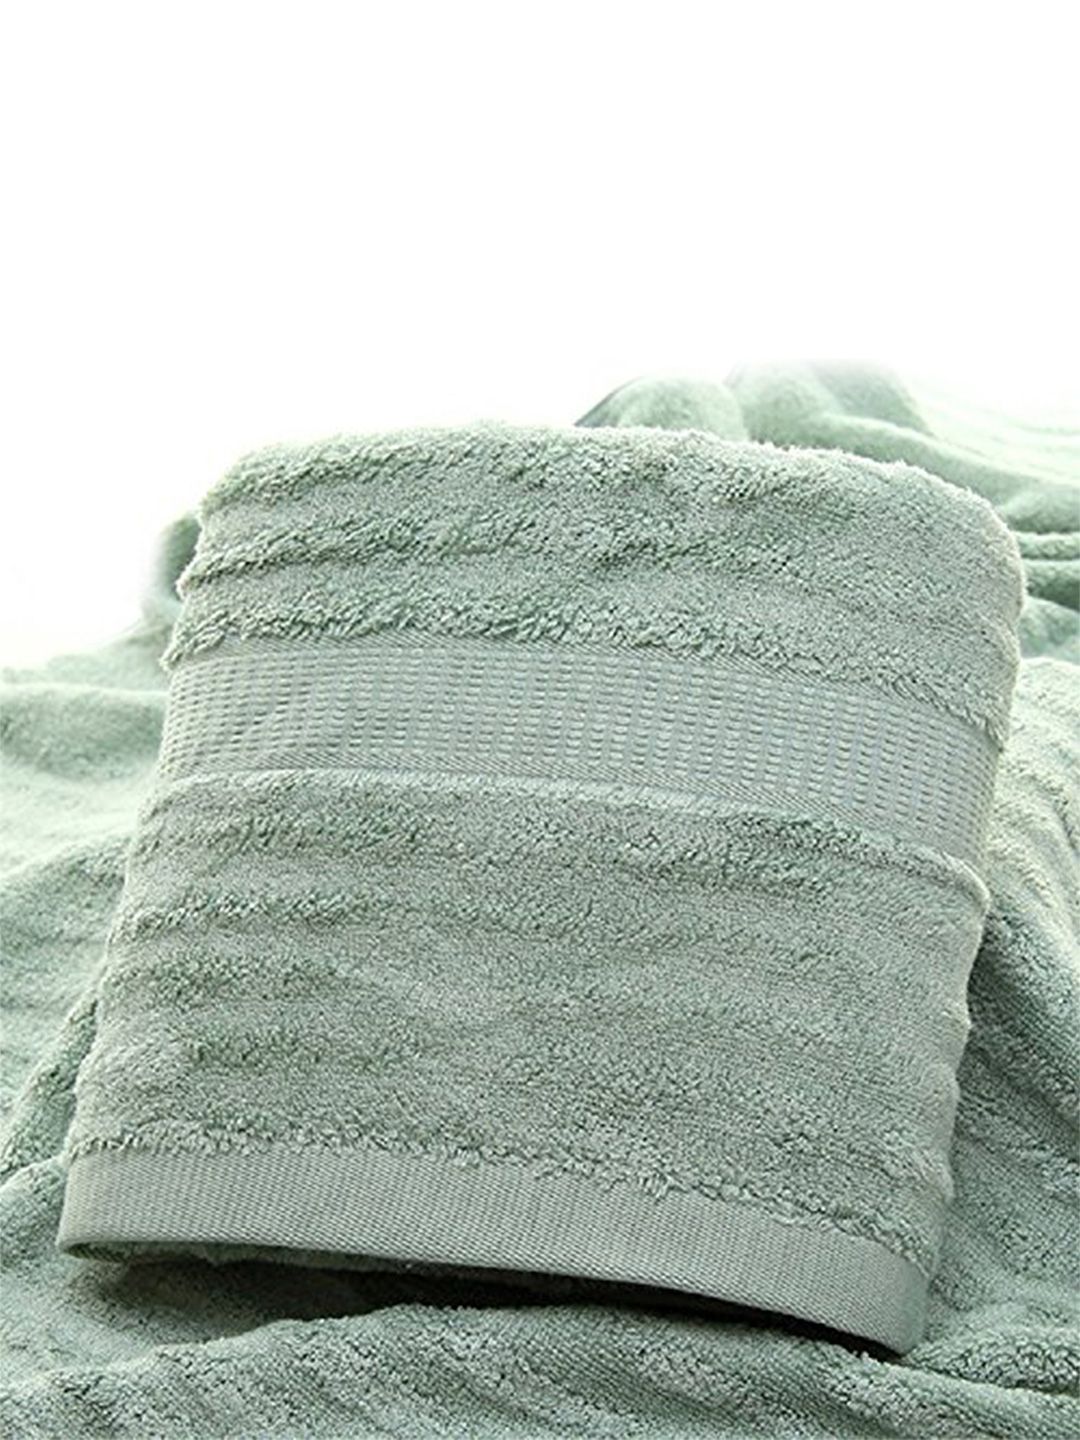 MUSH Olive Green Solid 600GSM High Absorbent & Bamboo Ultra Soft Eco Friendly Bath Towel Price in India